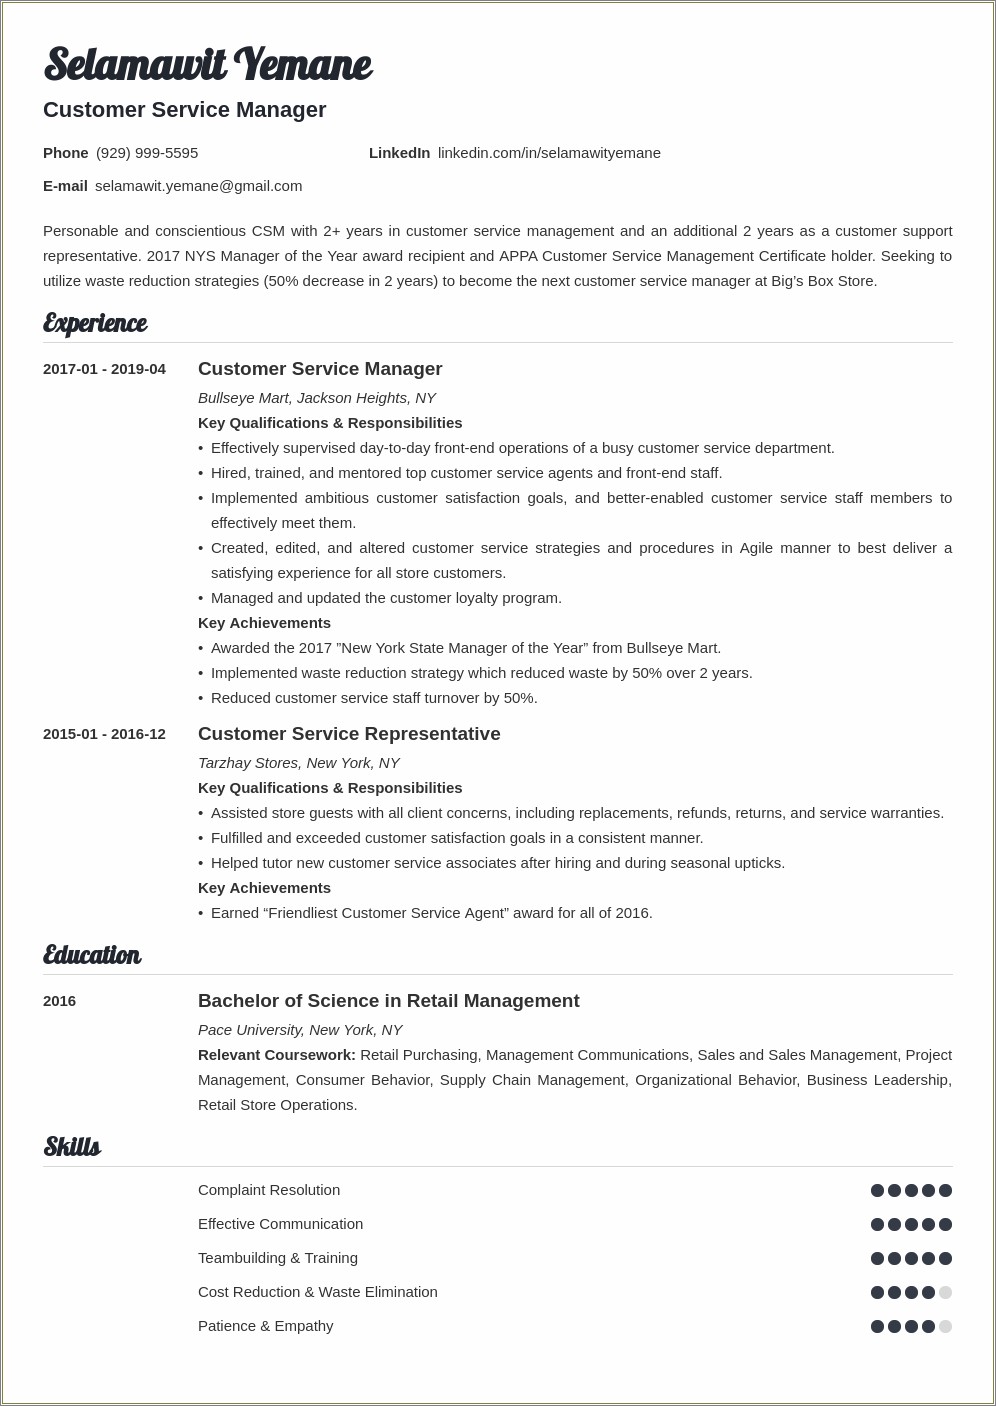 Illustration Of Guest Relation Skills In A Resume